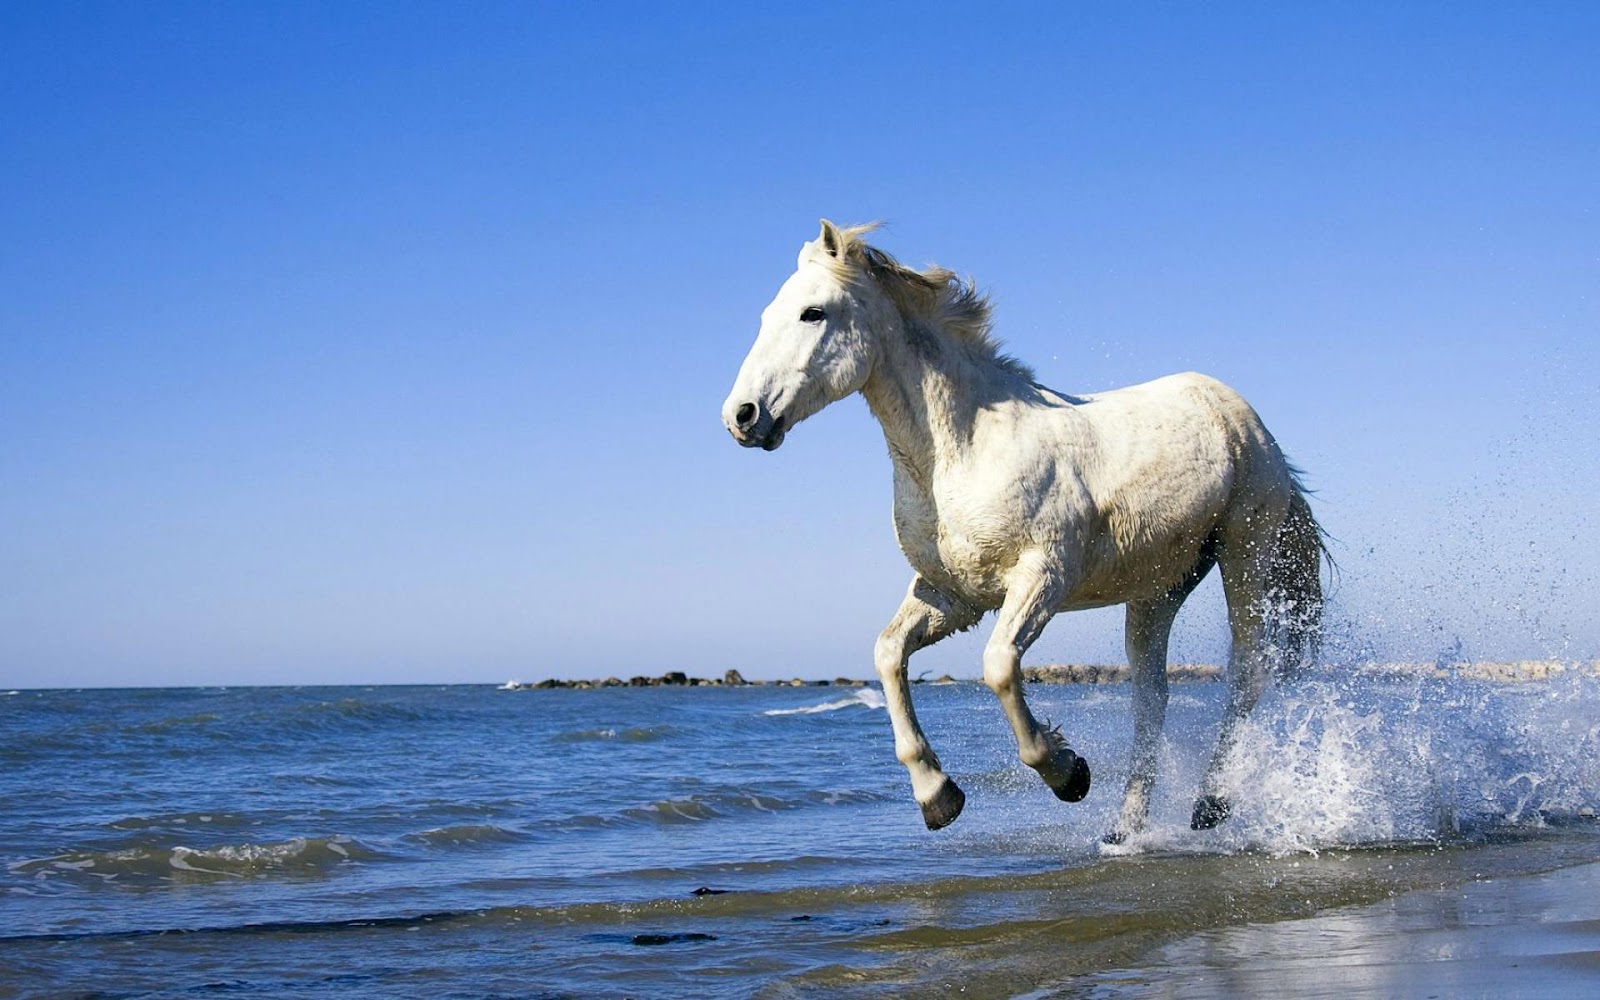 HD Animal Wallpaper With A White Horse Running Through The Sea